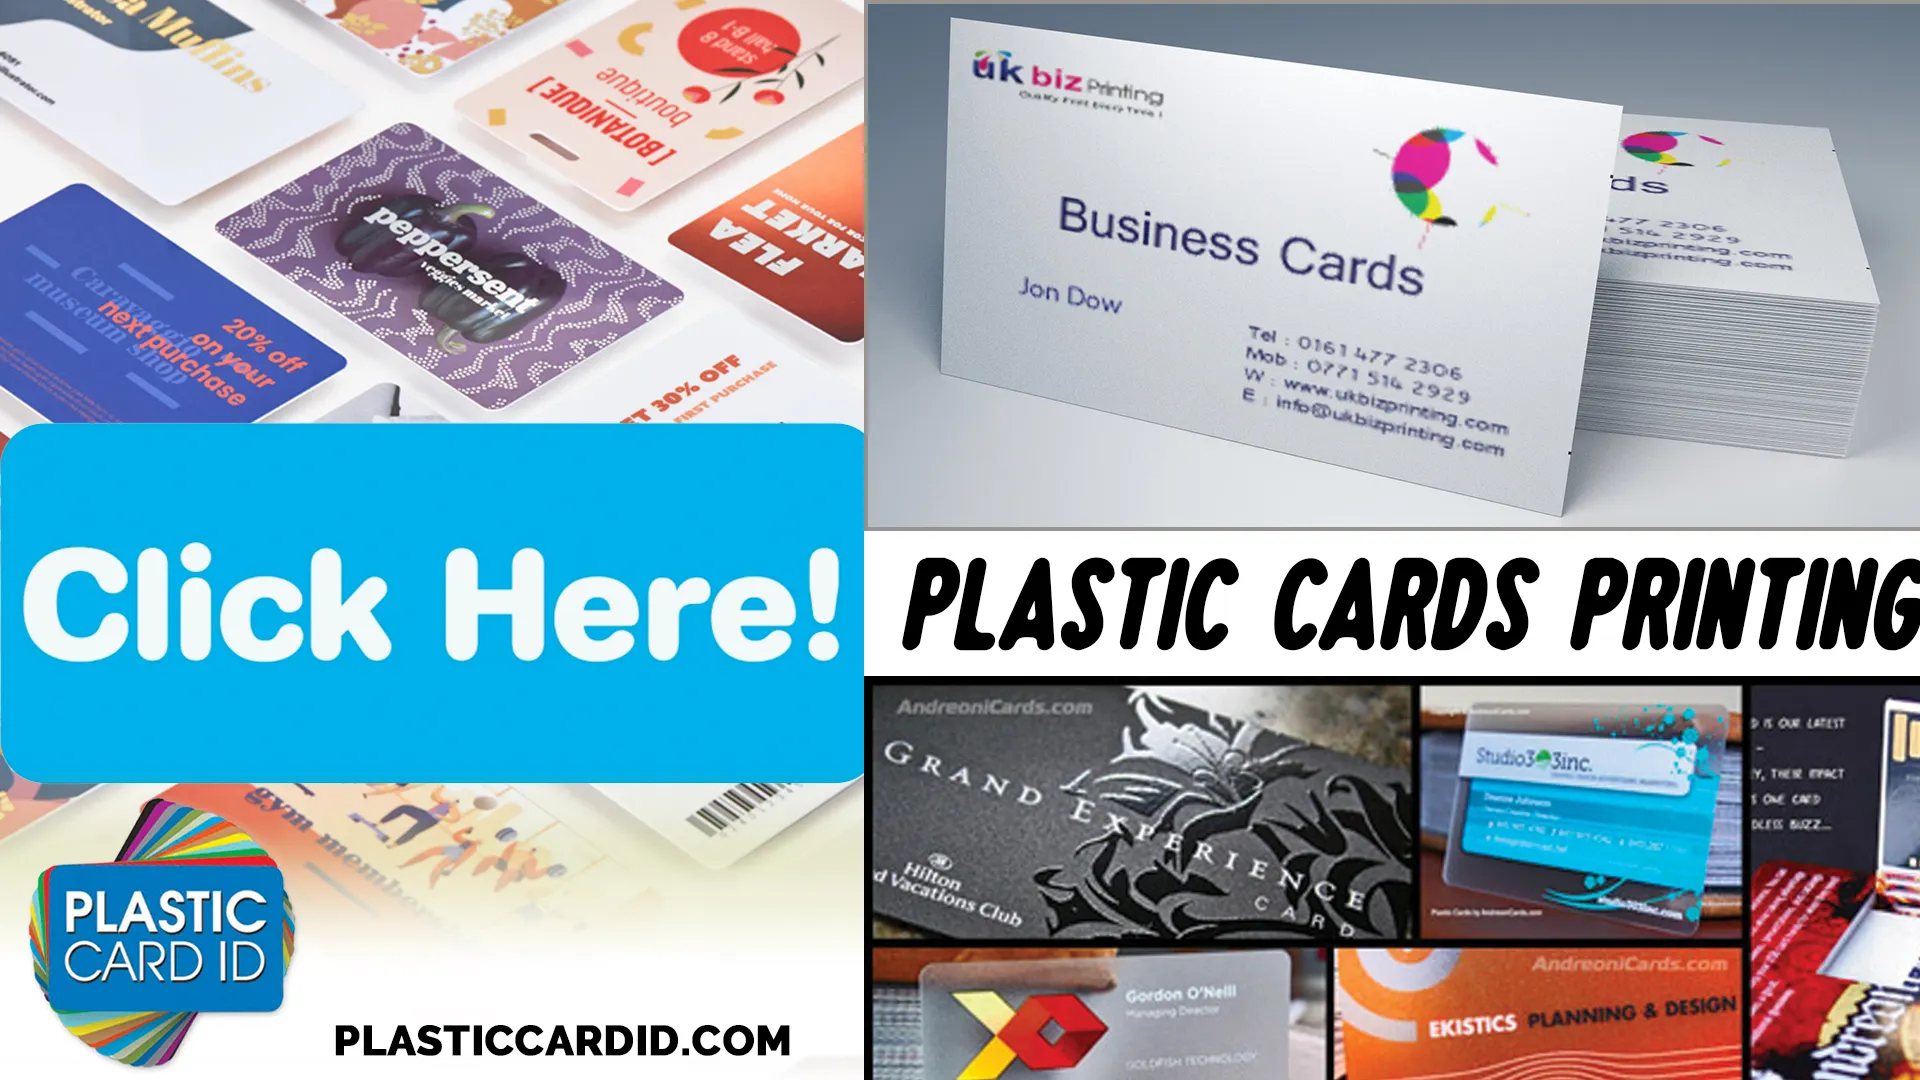 Optimize Your Card Printing with Expert Guidance